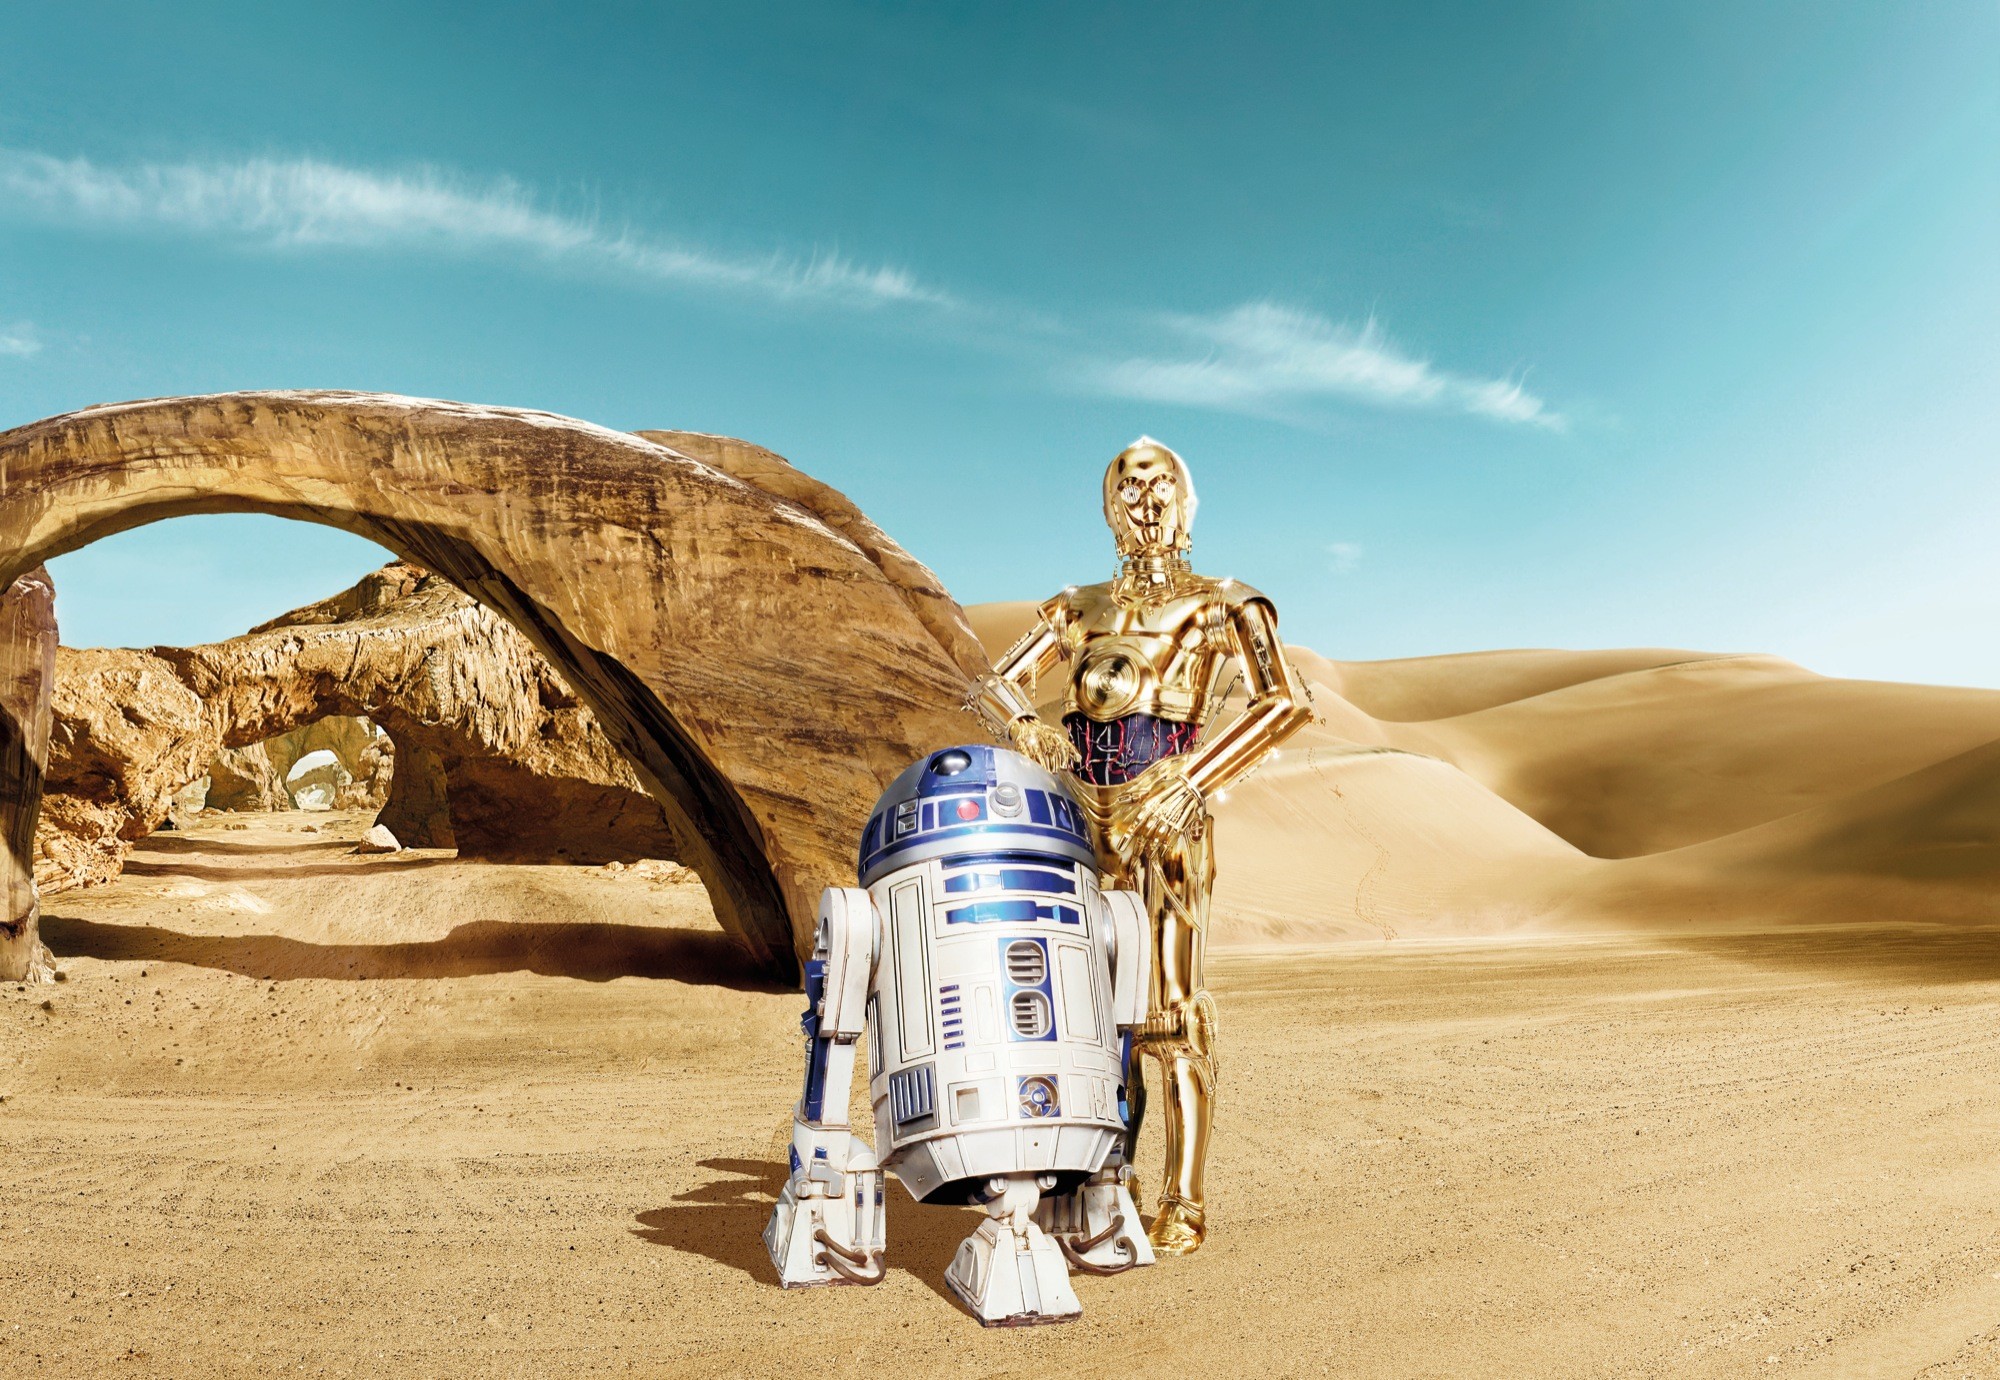 Free Download C3po And R2d2 Wallpaper 73 Images 00x1380 For Your Desktop Mobile Tablet Explore 55 Star Wars R2 D2 Cool Space Backgrounds Star Wars R2 D2 Cool Space Backgrounds R2 D2 Wallpaper